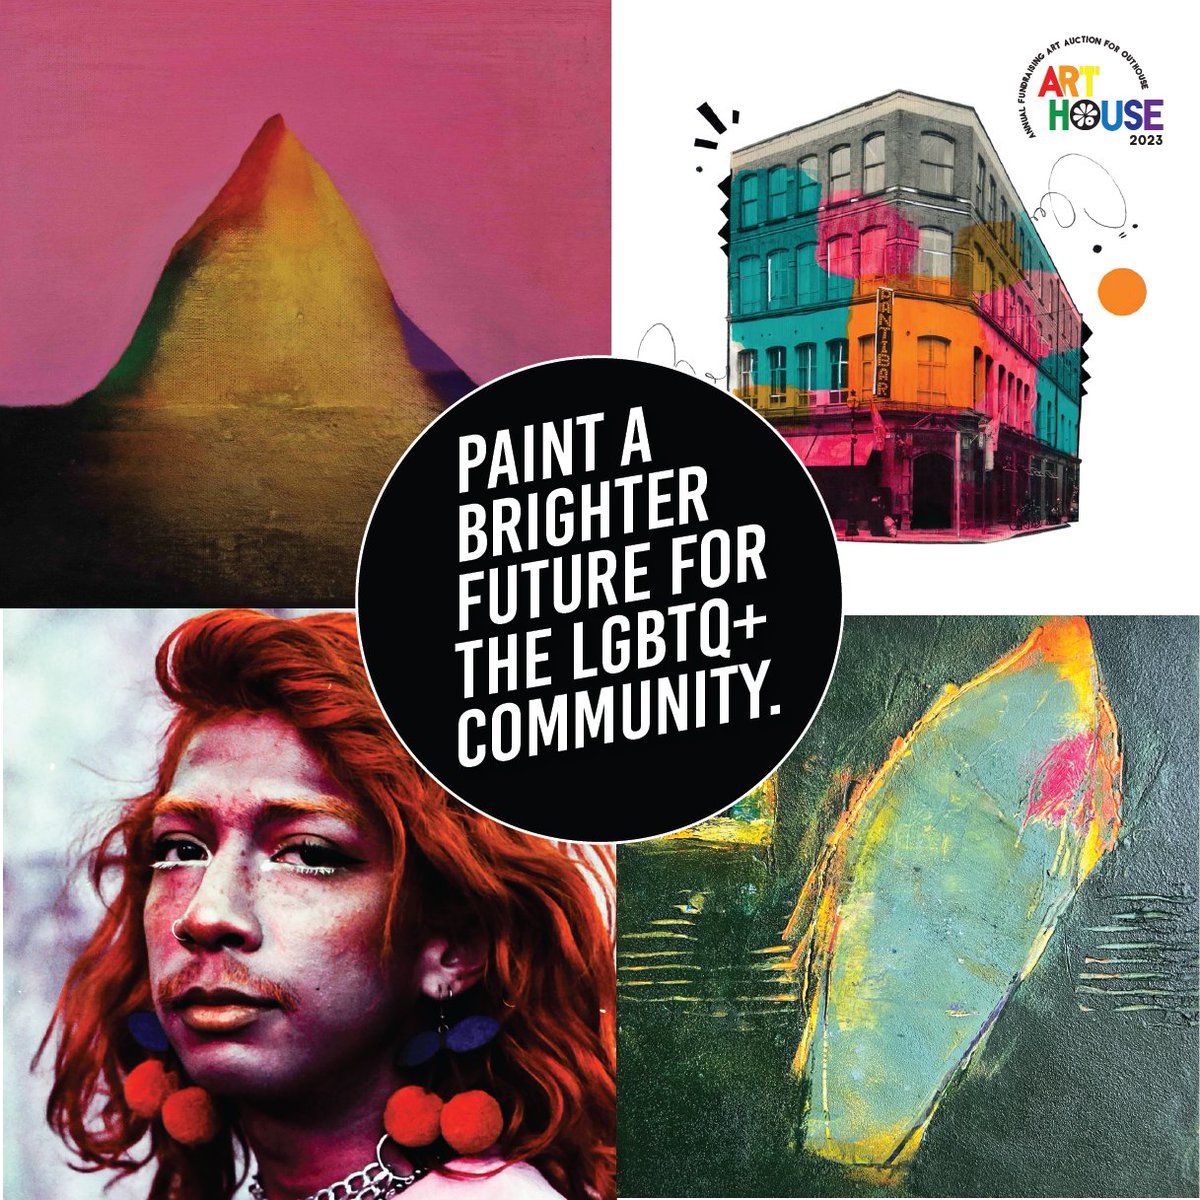 🌈 💥The final auction days take place 𝐭𝐡𝐢𝐬 #Saturday and #Sunday with lots closing from 3:00 PM each day. 🕒

👉 Register Now
bit.ly/arthouse23 and spread the love!

#Arthouse2023 #OuthouseDublin #rencreativeworks #artauction #artauctions #dublin #ireland #art